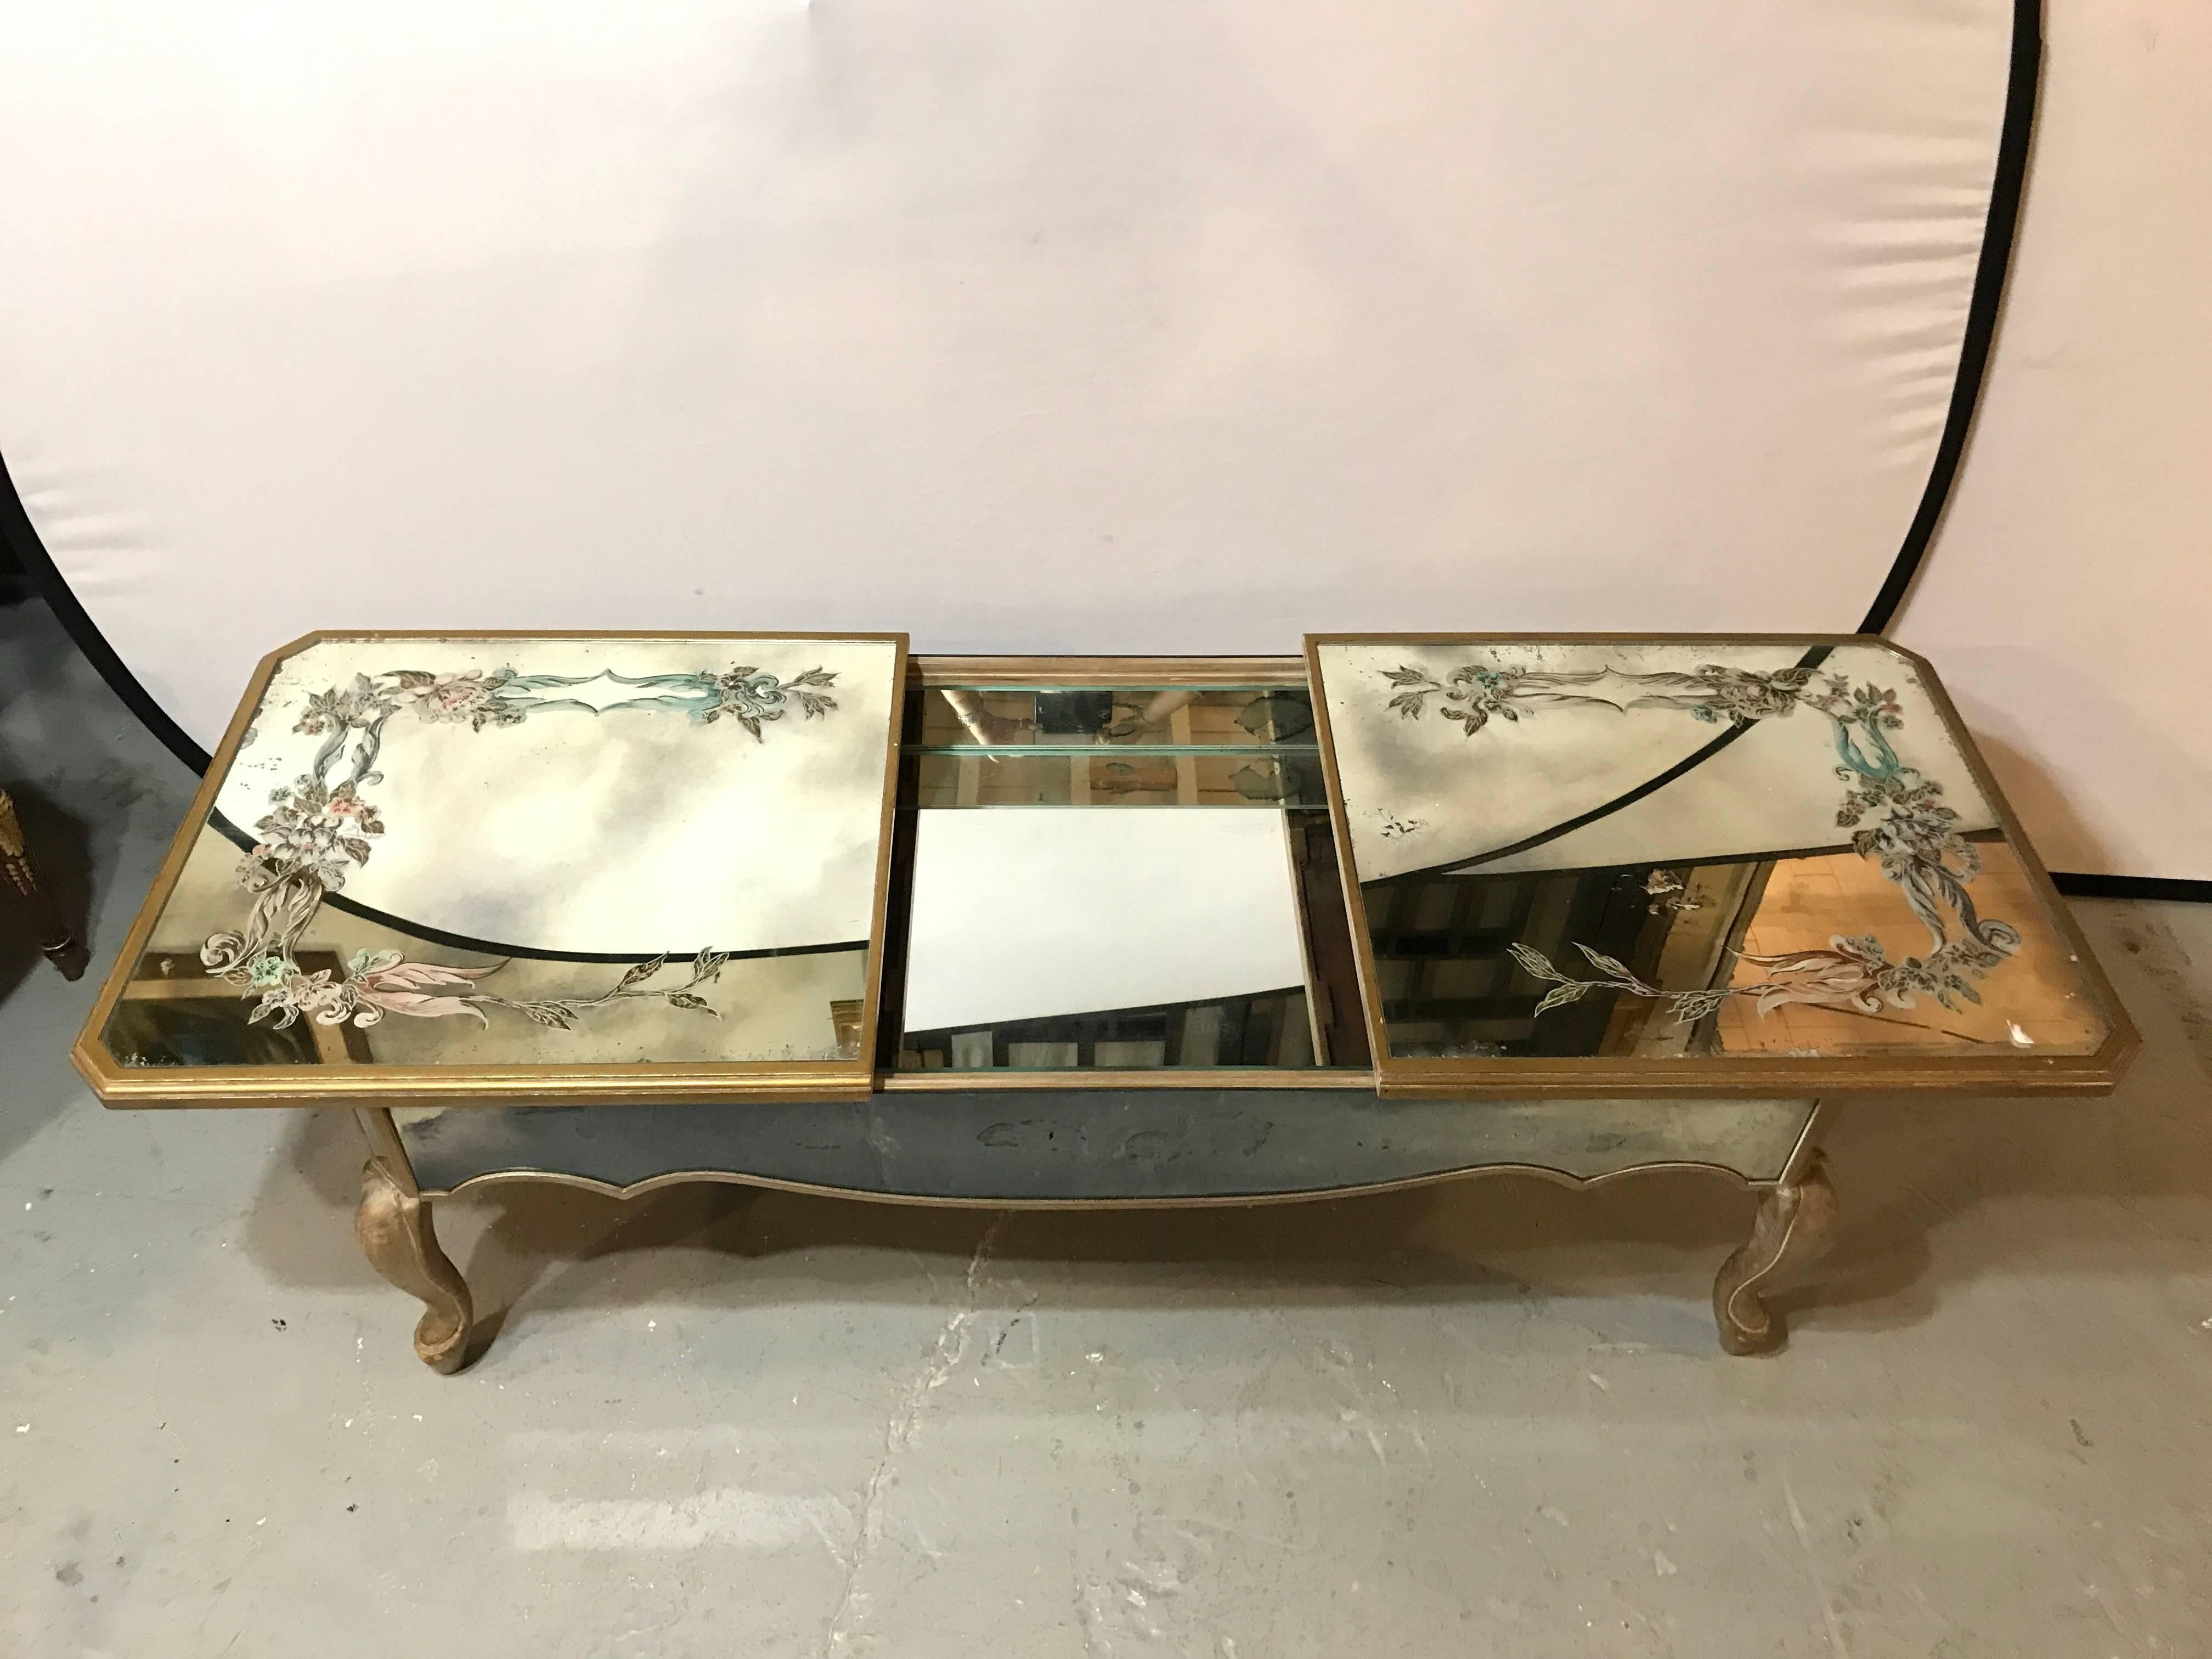 An Italian reverse paint decorated sliding top coffee low table. The gilt gold design legs and mirrored apron support a floral arrangement reverse painted on a mirrored top. The end slides open to use for storage.